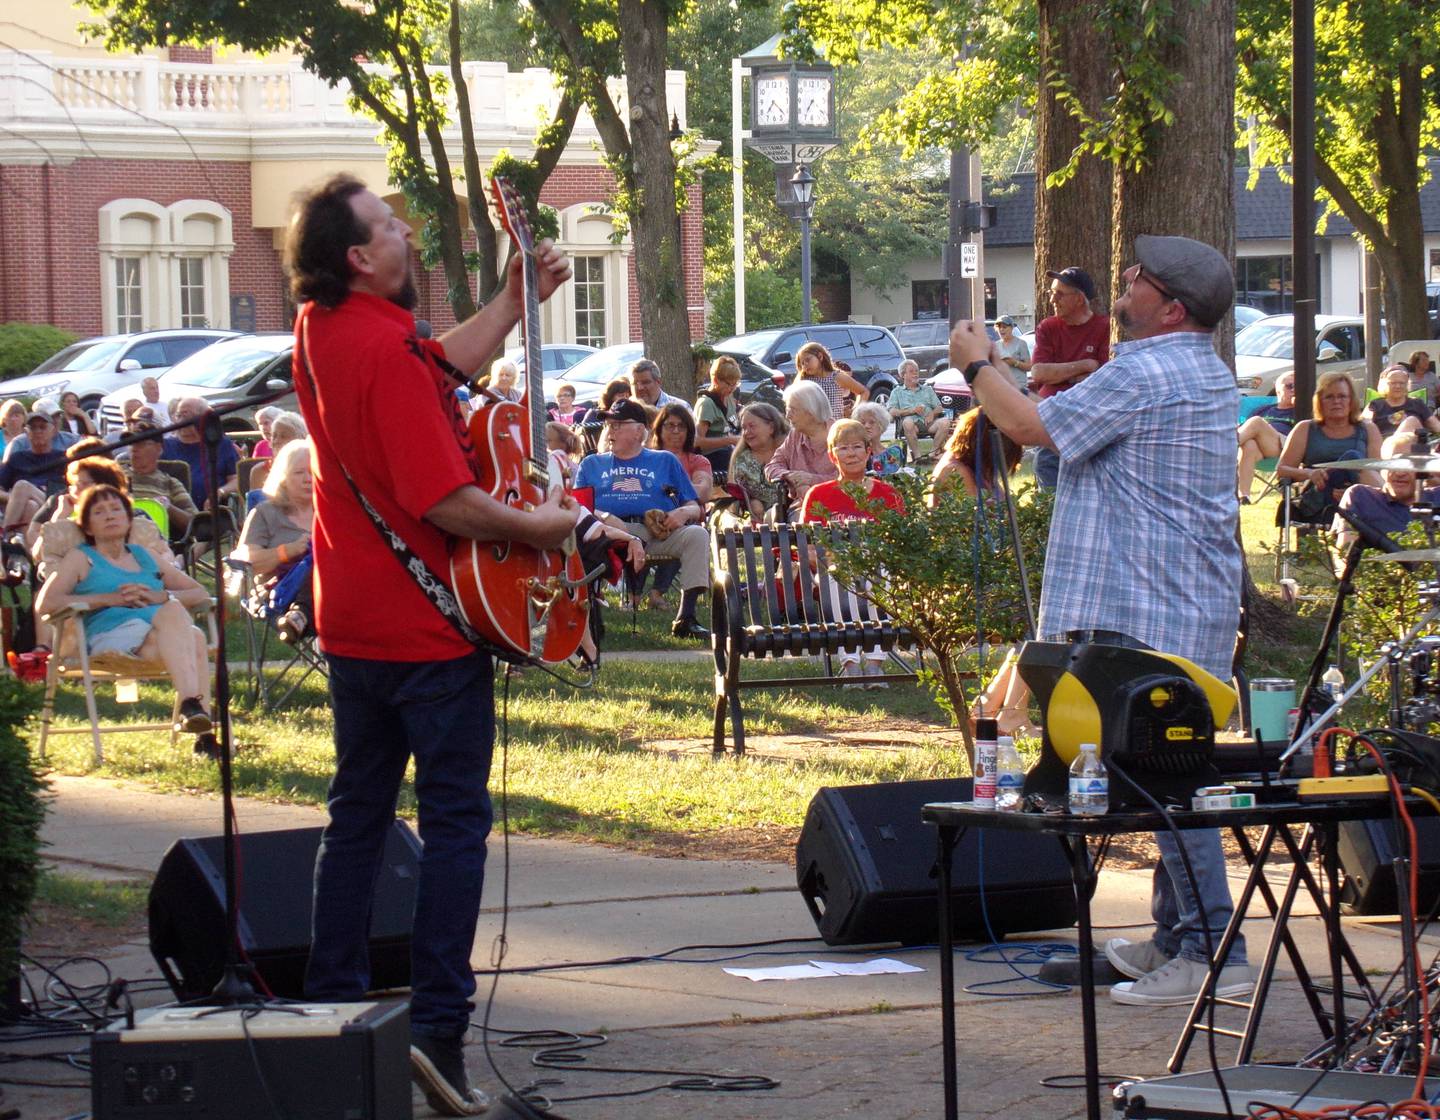 The Radium City Rebels perform Saturday, July 2, 2022, at the Ottawa Music in the Park Series in Washington Square.